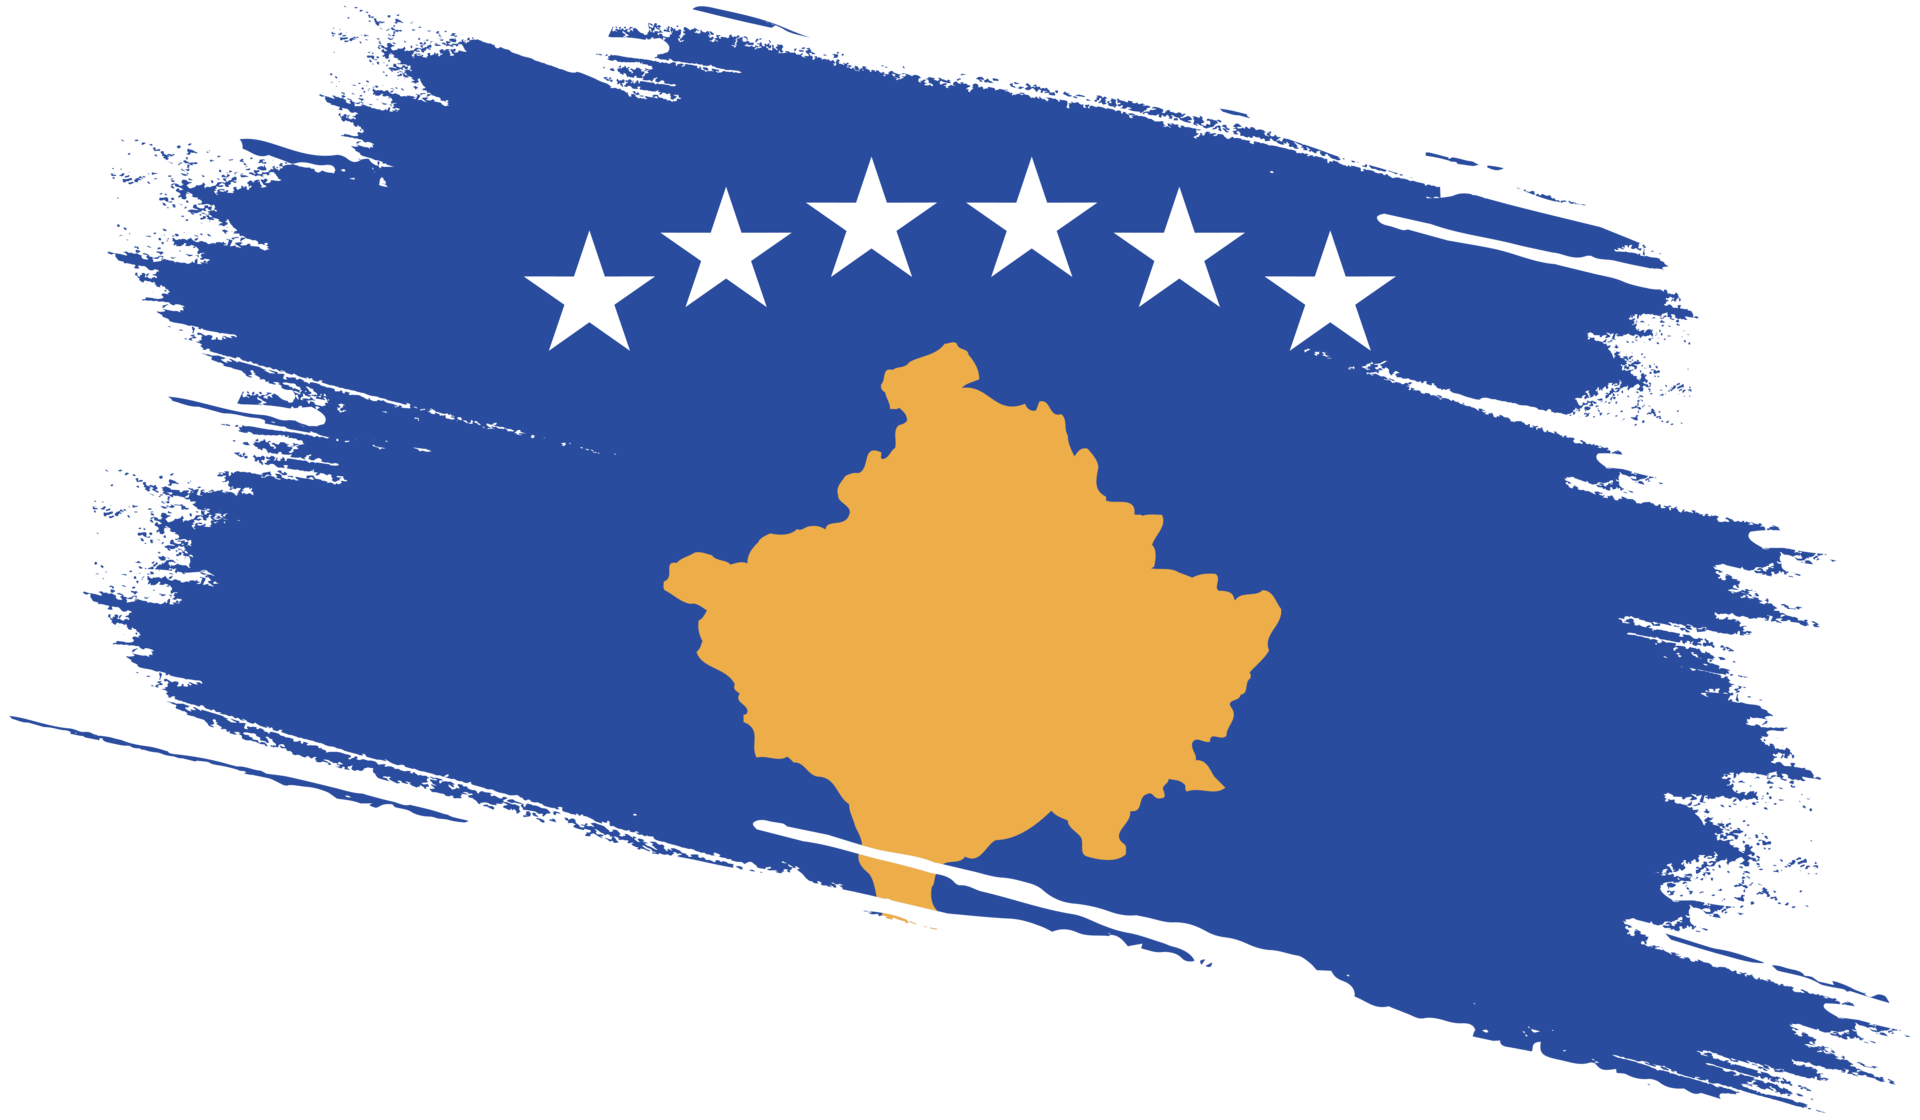 https://static.vecteezy.com/system/resources/previews/012/024/955/original/kosovo-flag-with-grunge-texture-png.png